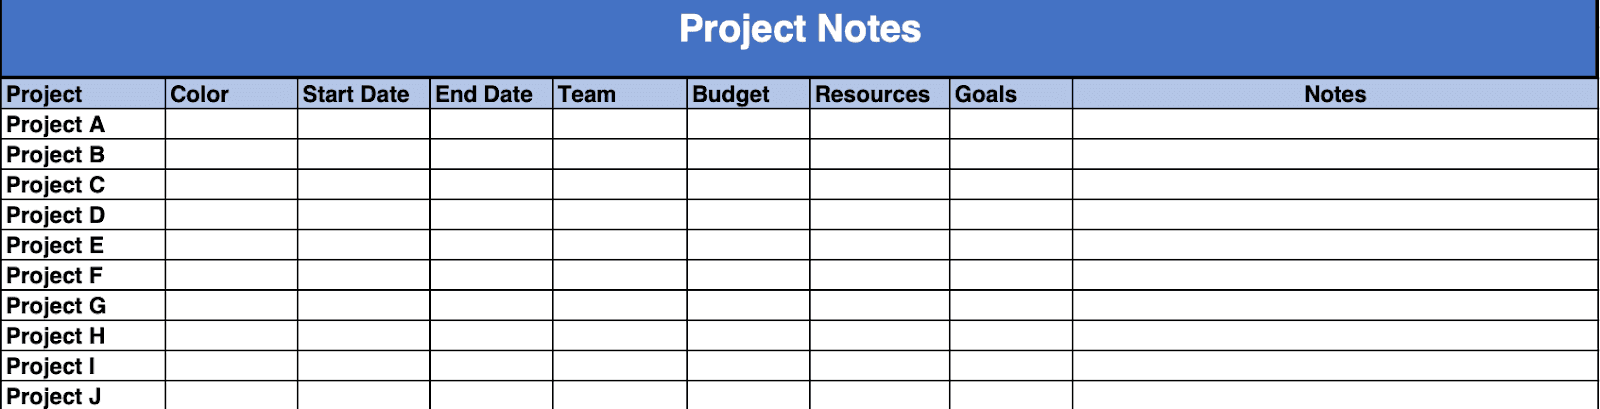 Blank project notes template